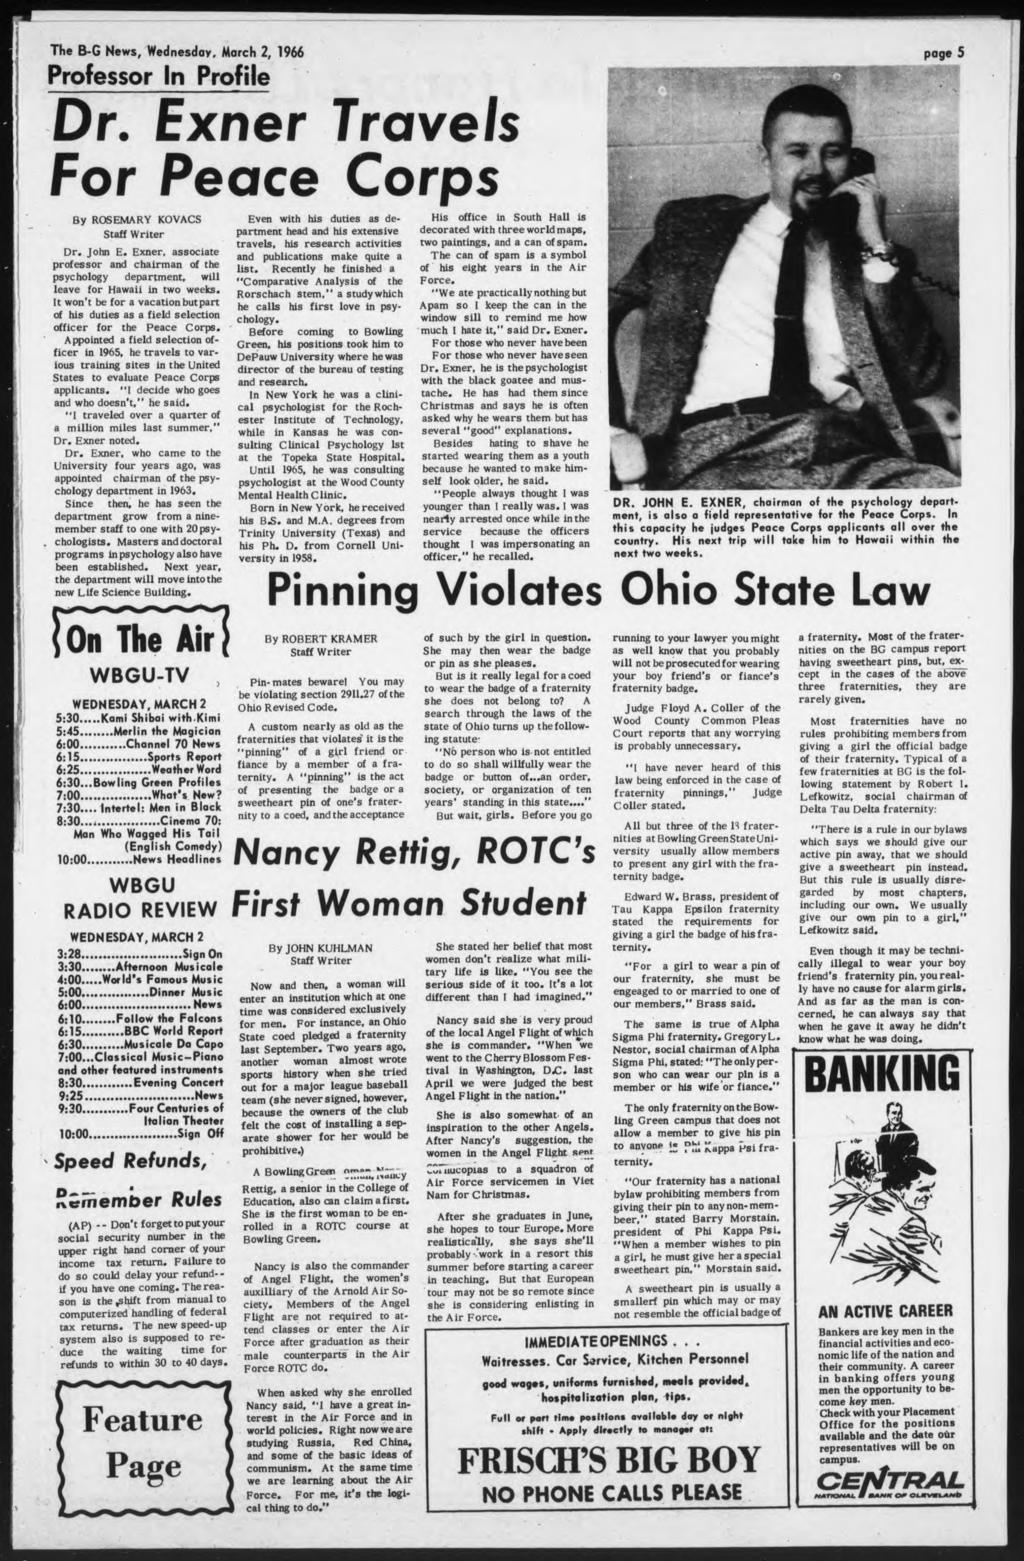 The B-G News, Wednesday. March, 1966 Professor In Profile page 5 Dr. Exner Travels For Peace Corps By ROSEMARY KOVACS Staff Writer Dr. John E.